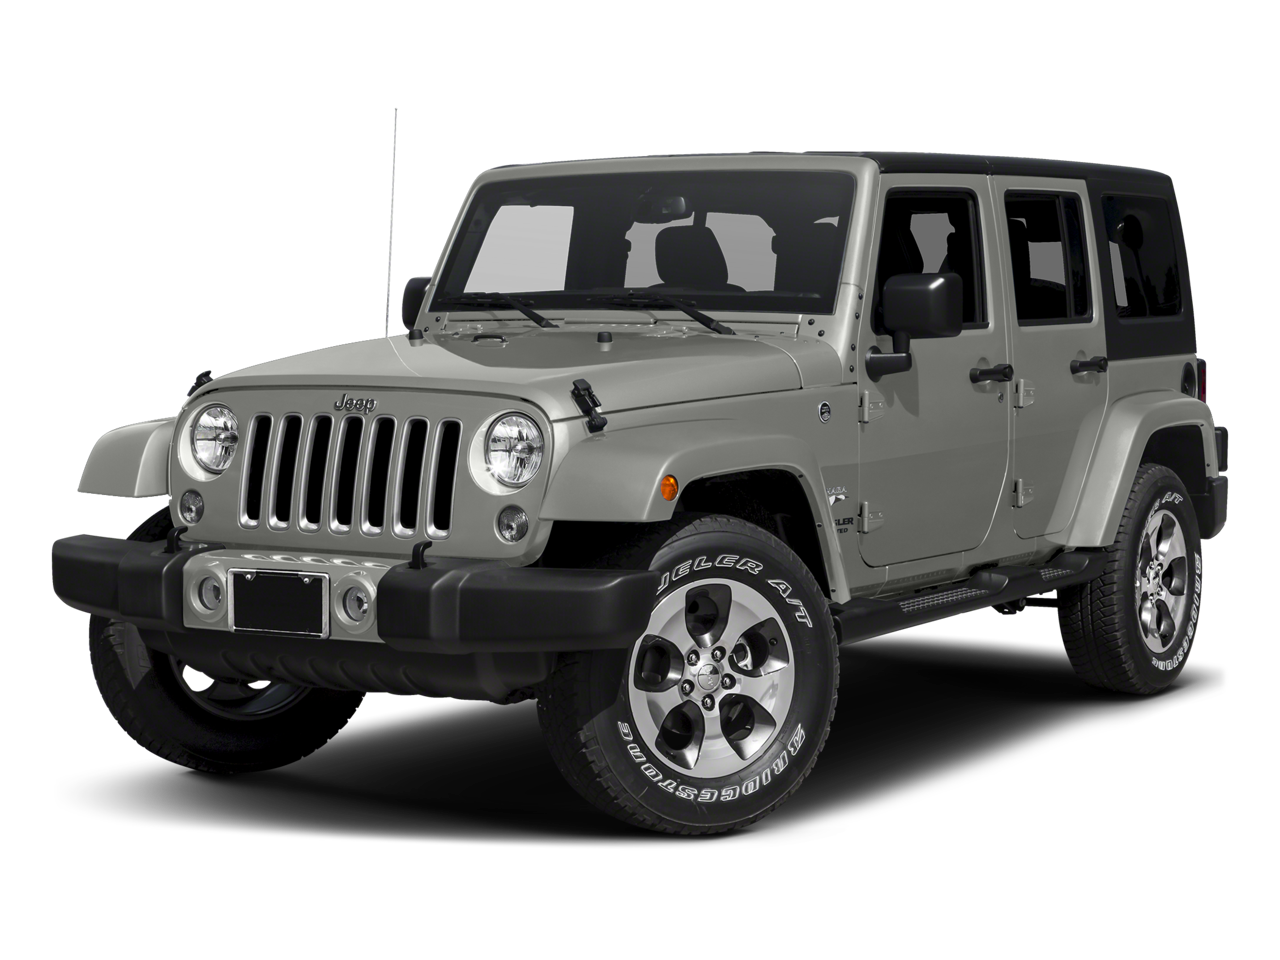 2016 Jeep Wrangler Unlimited Sahara in Prince Frederick, MD | Washington Jeep  Wrangler Unlimited | Prince Frederick Ford